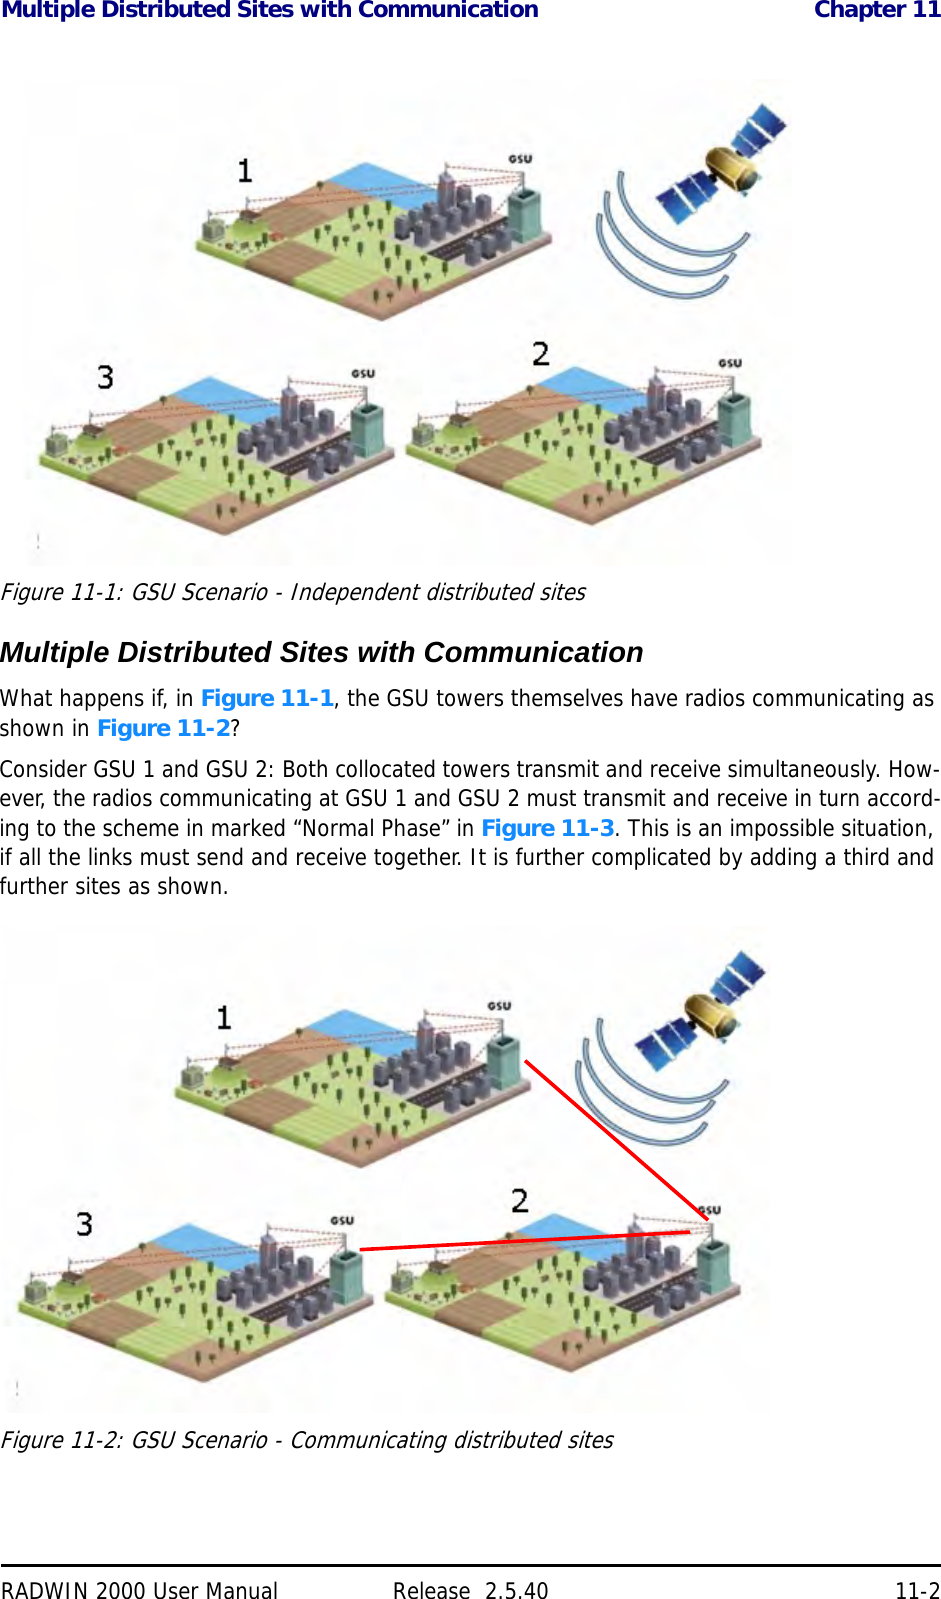 Multiple Distributed Sites with Communication Chapter 11RADWIN 2000 User Manual Release  2.5.40 11-2pendent dis tributed sitesFigure 11-1: GSU Scenario - Independent distributed sitesMultiple Distributed Sites with CommunicationWhat happens if, in Figure 11-1, the GSU towers themselves have radios communicating as shown in Figure 11-2?Consider GSU 1 and GSU 2: Both collocated towers transmit and receive simultaneously. How-ever, the radios communicating at GSU 1 and GSU 2 must transmit and receive in turn accord-ing to the scheme in marked “Normal Phase” in Figure 11-3. This is an impossible situation, if all the links must send and receive together. It is further complicated by adding a third and further sites as shown.Figure 11-2: GSU Scenario - Communicating distributed sites